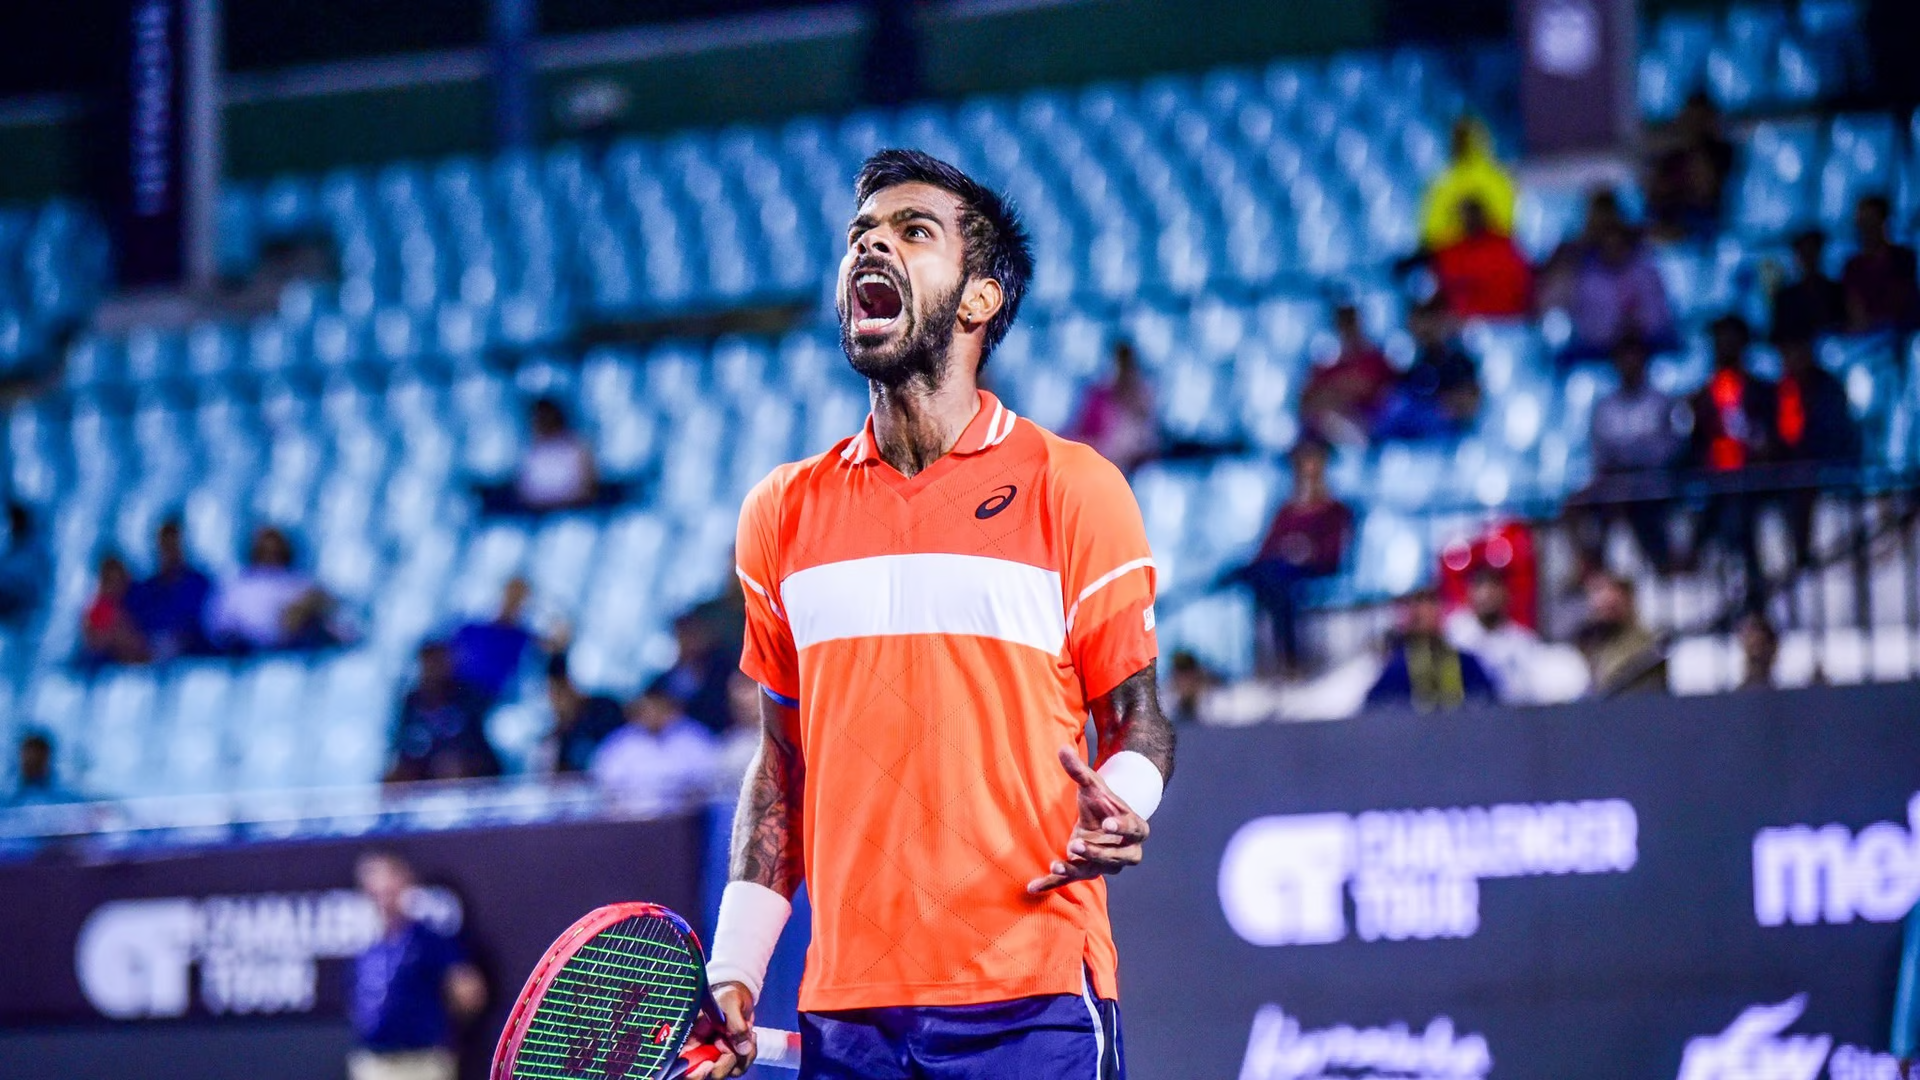 Sumit Nagal’s Marrakech Exploits Propel Him to Career-Best ATP Ranking of 93